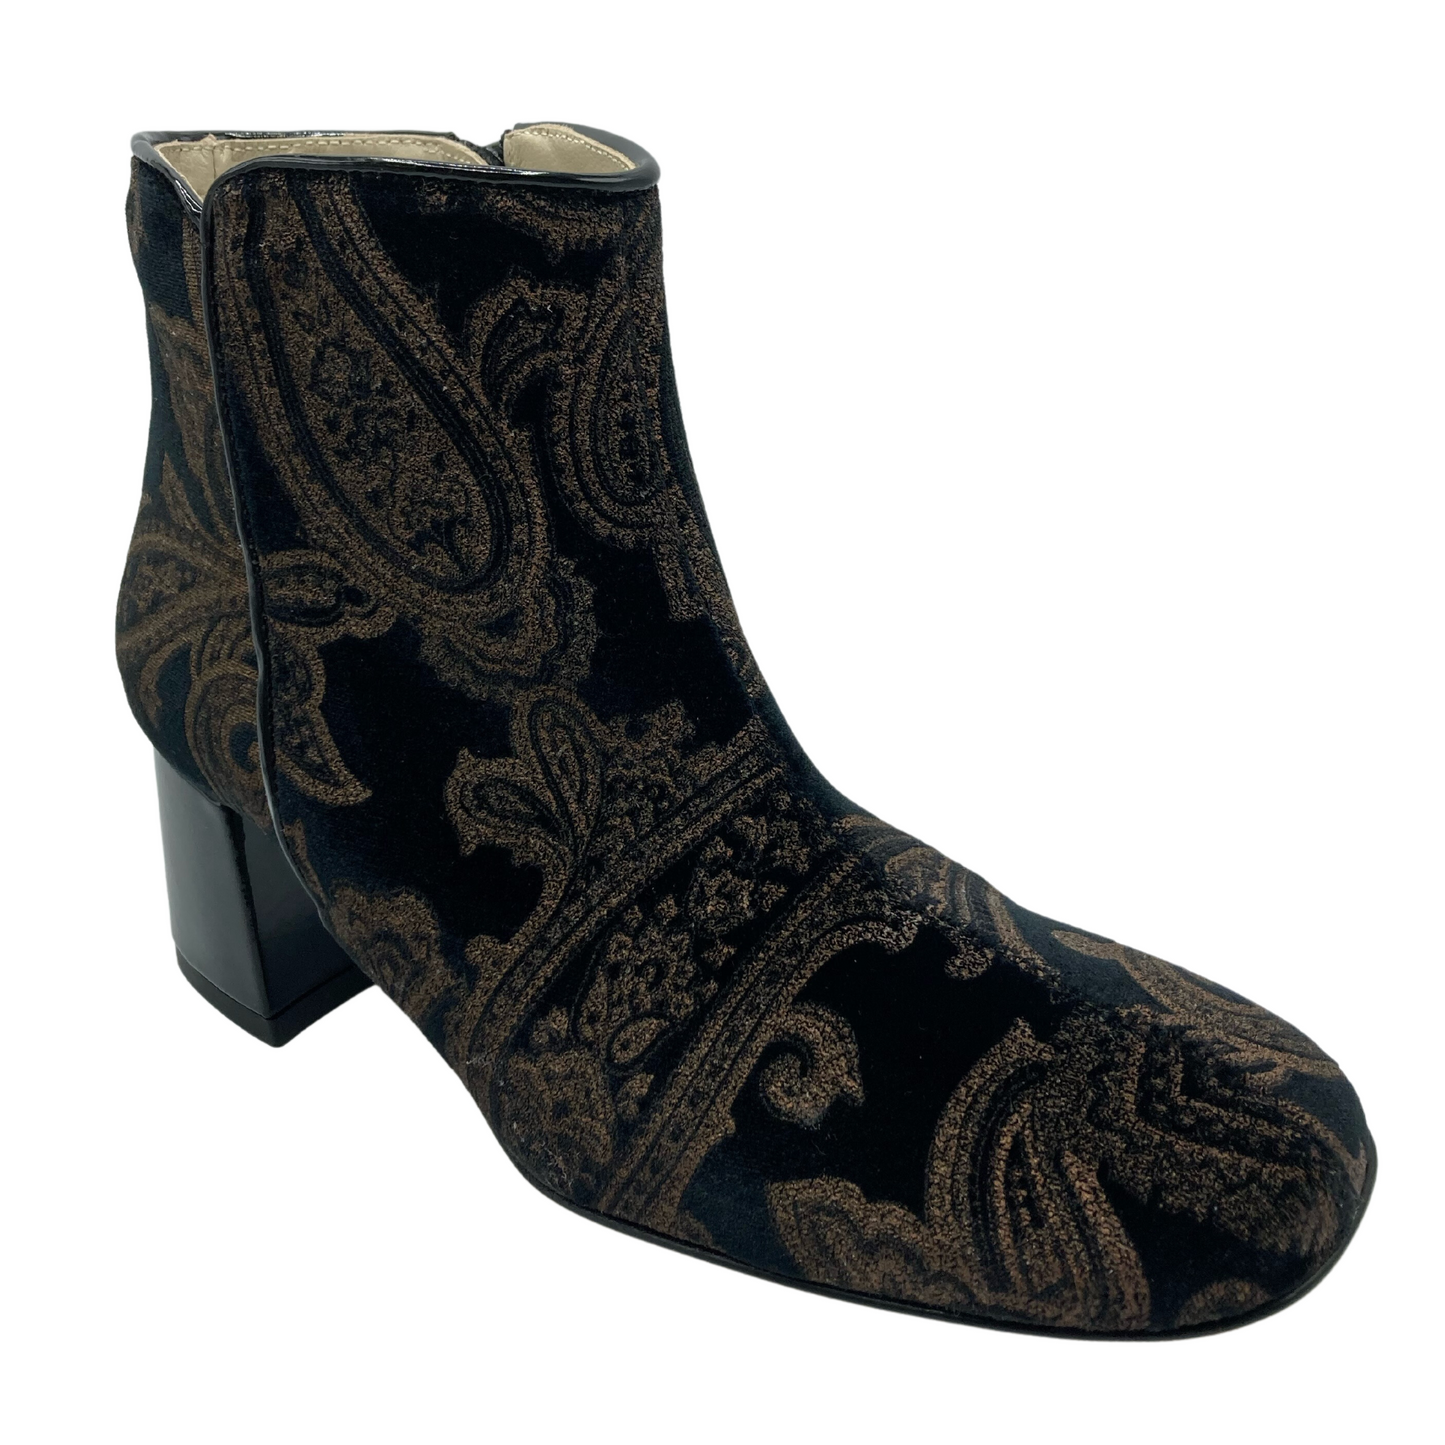 45 degree angled view of black velvet bootie with brown brocade pattern and square toe with block heel